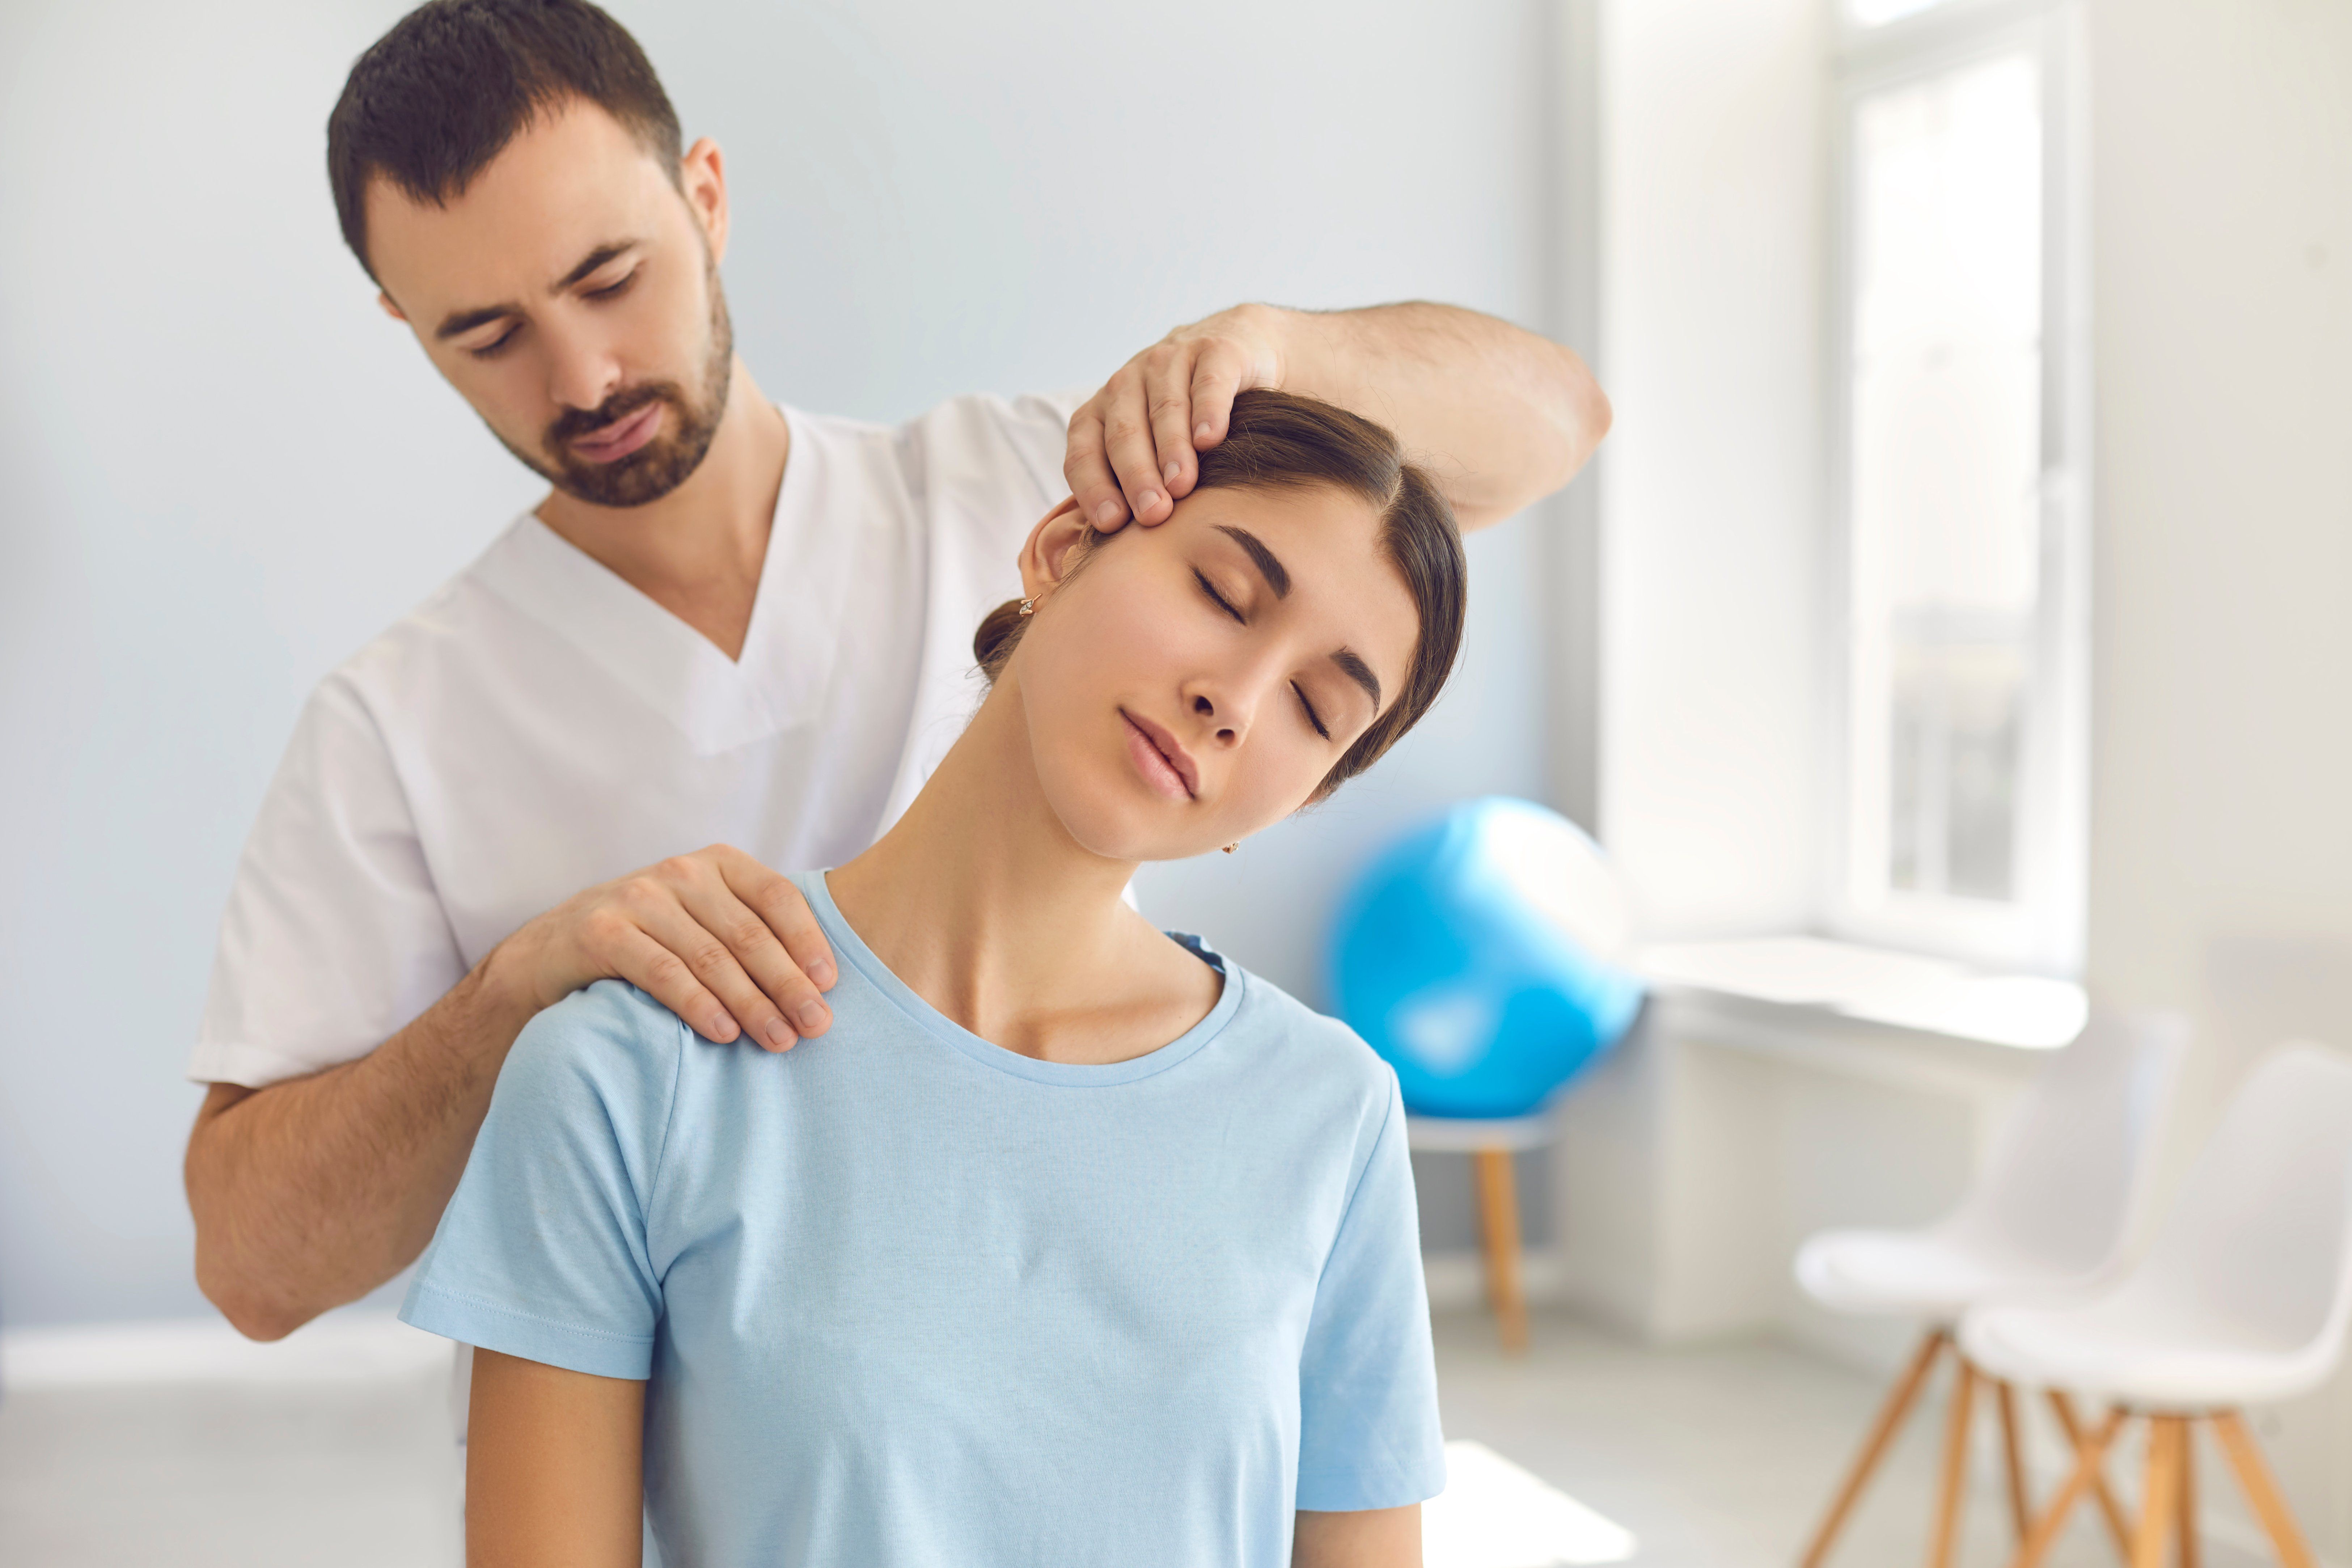 Benefits of Seeing a Chiropractor for Neck Pain Relief